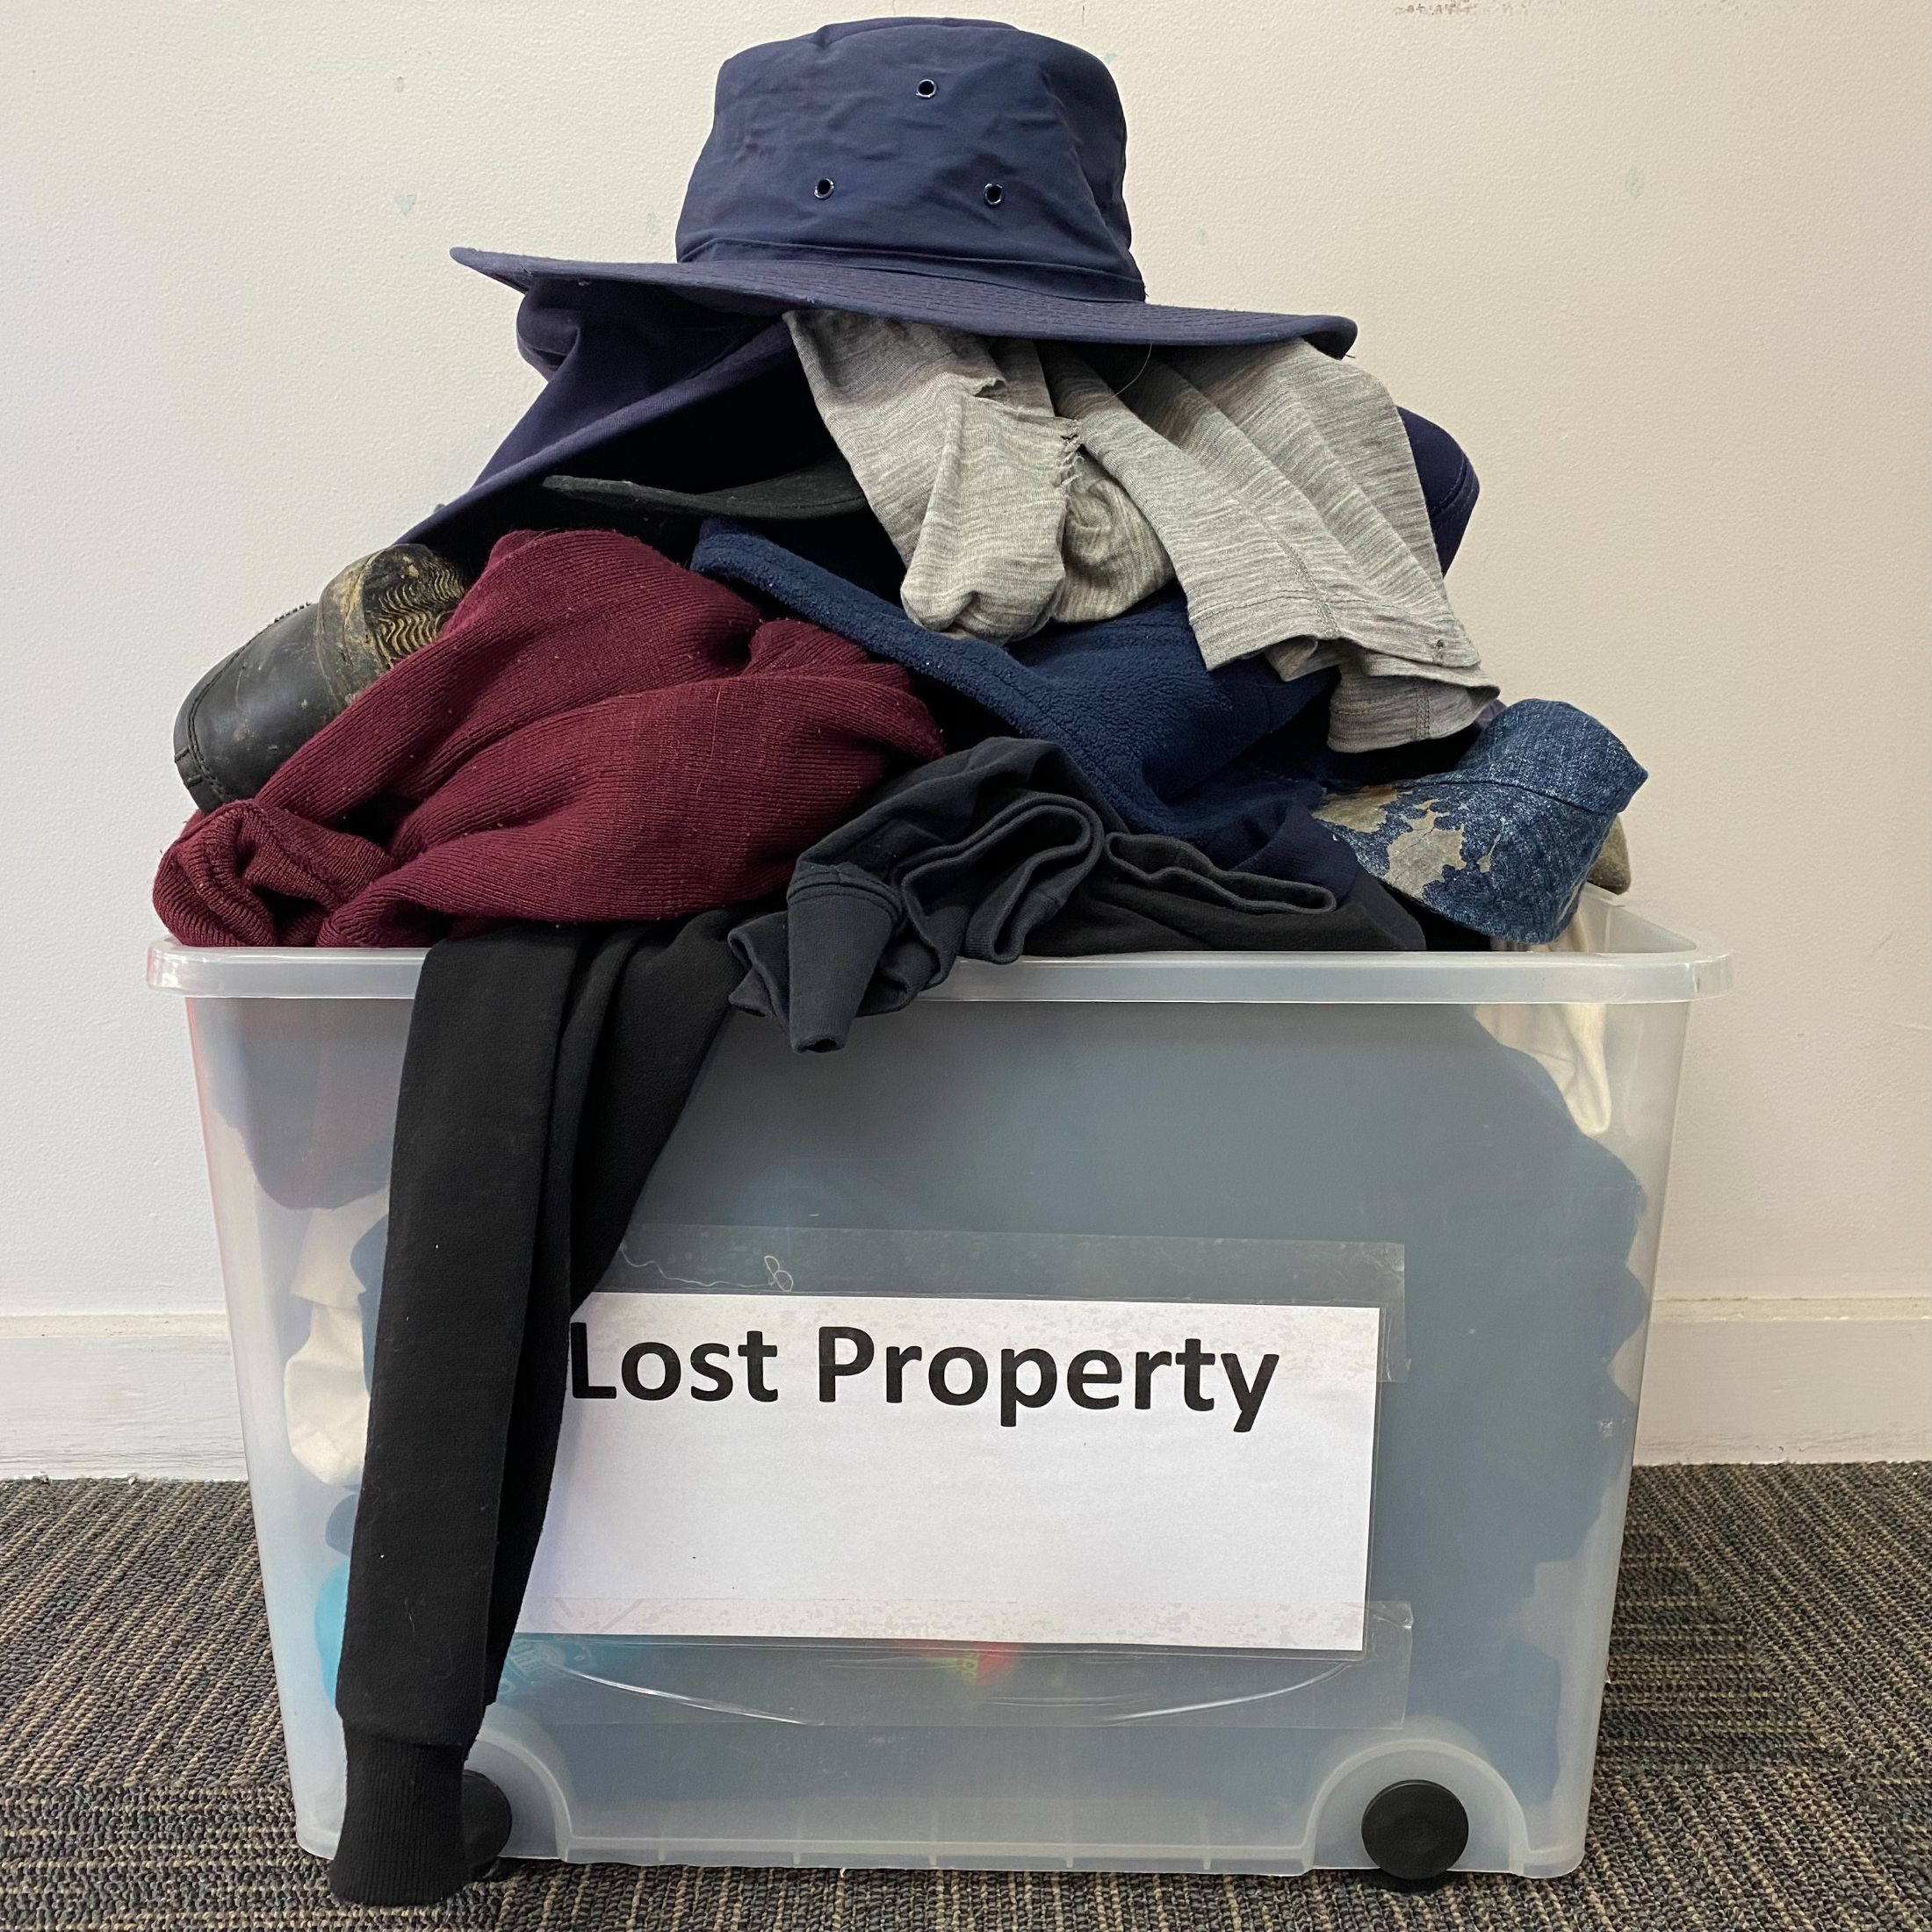 Lost Property Piles Up Again!